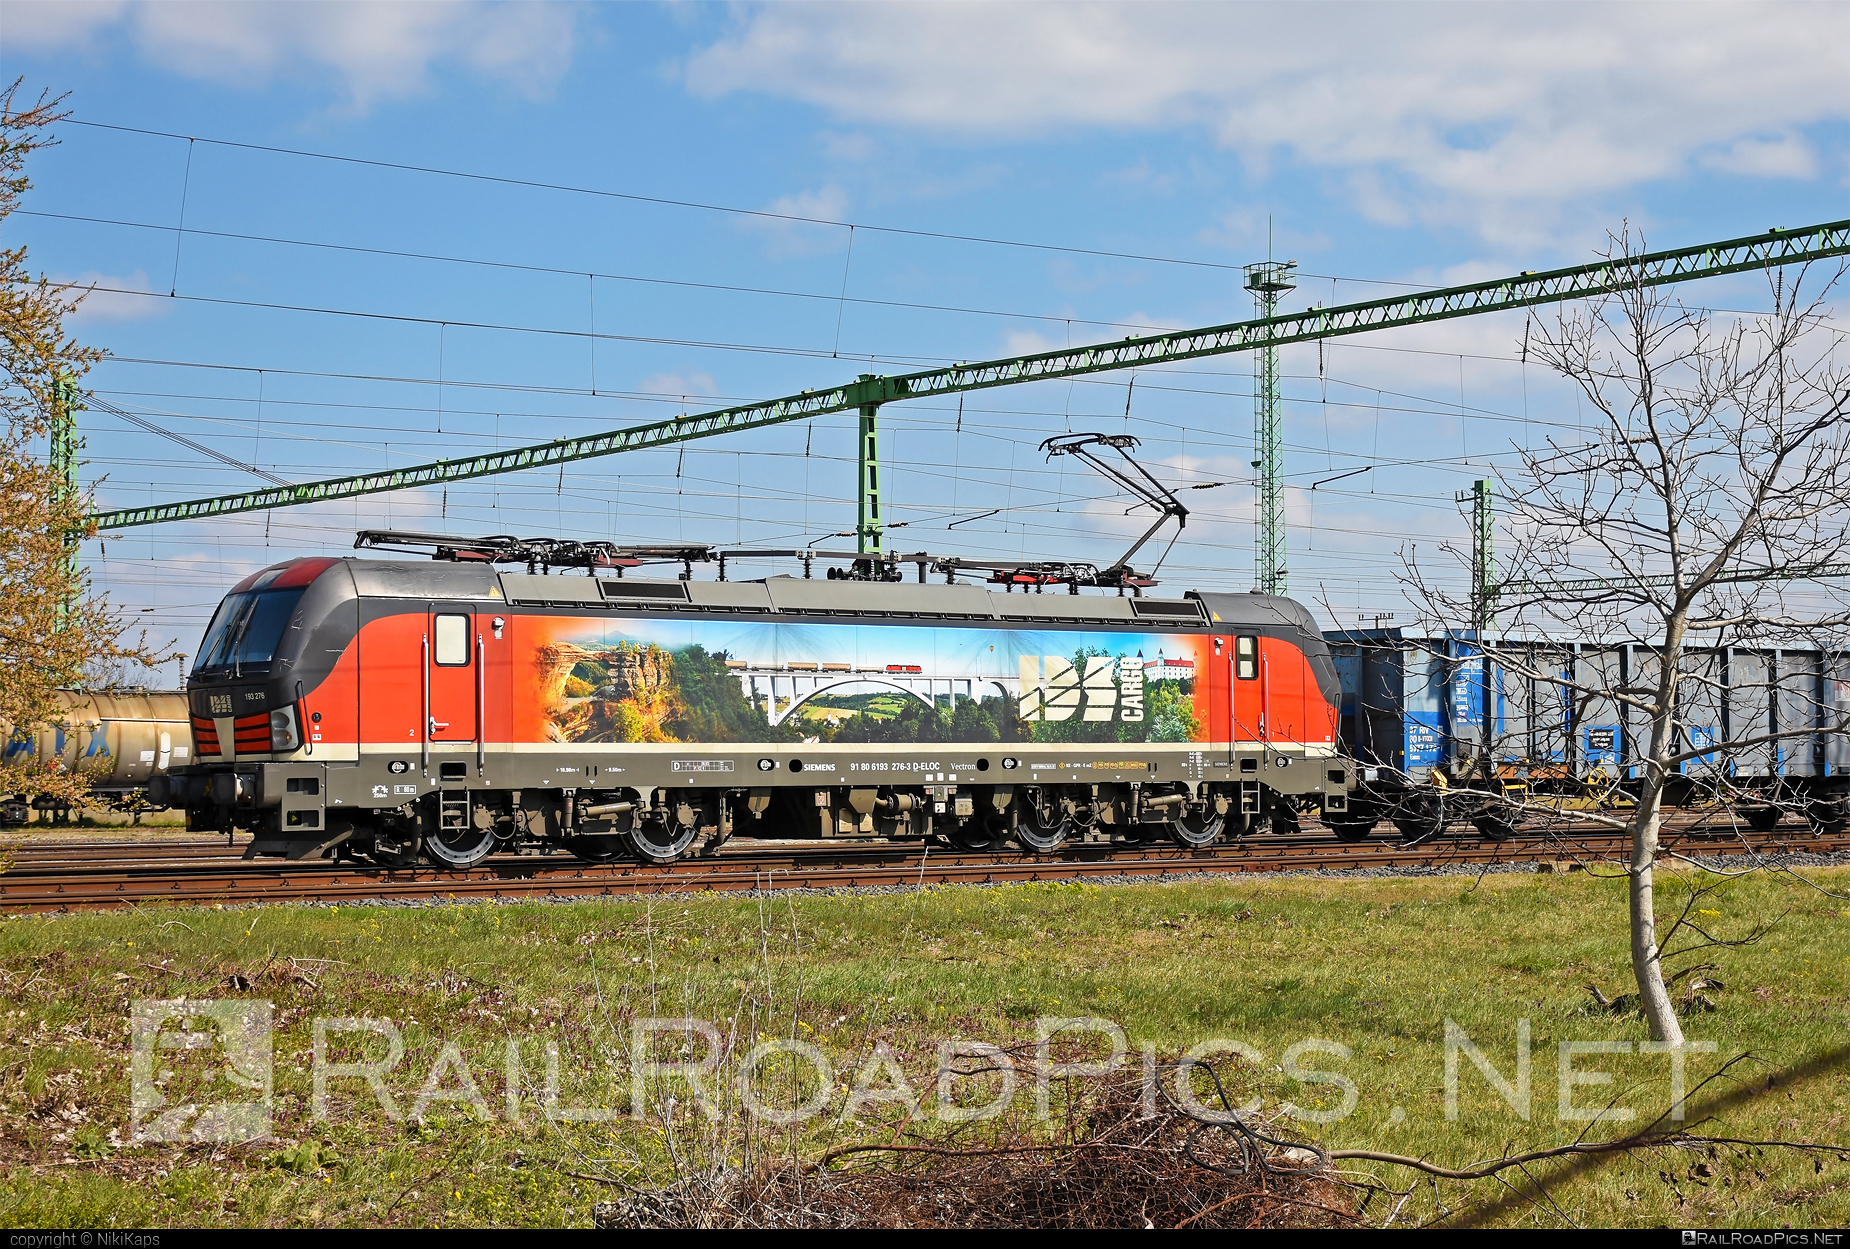 Siemens Vectron MS - 193 276 operated by IDS CARGO a. s. #ell #ellgermany #eloc #europeanlocomotiveleasing #idsc #idscargo #openwagon #siemens #siemensVectron #siemensVectronMS #vectron #vectronMS